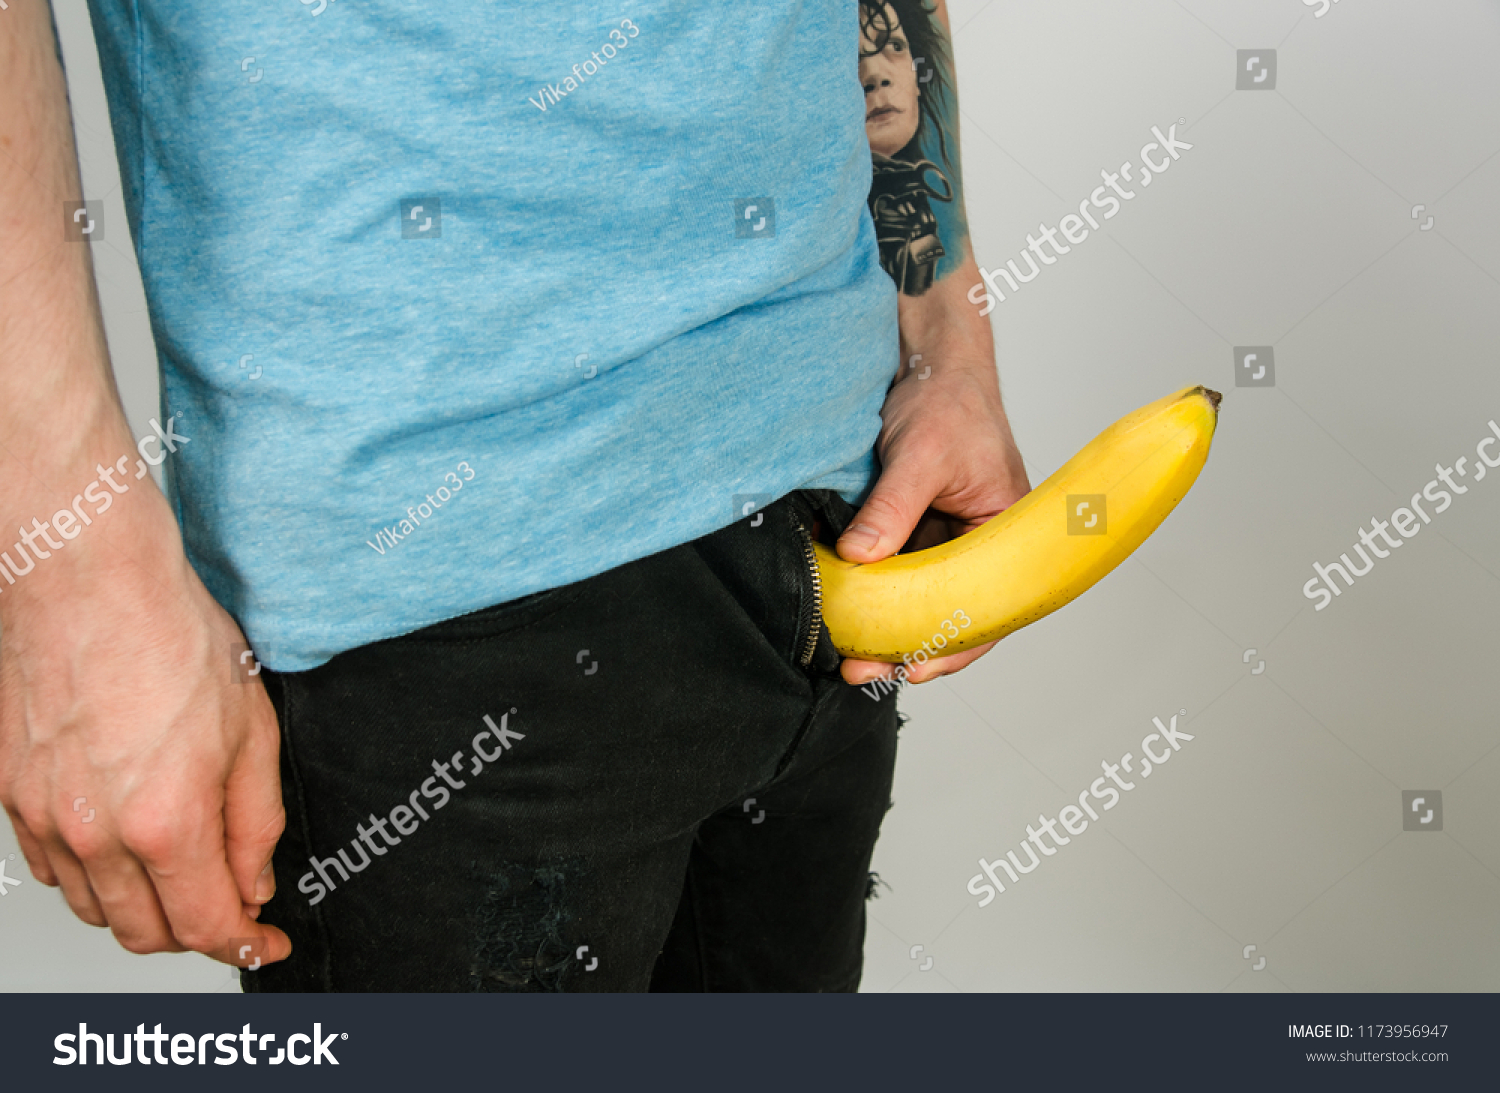 penis sticking out of pants